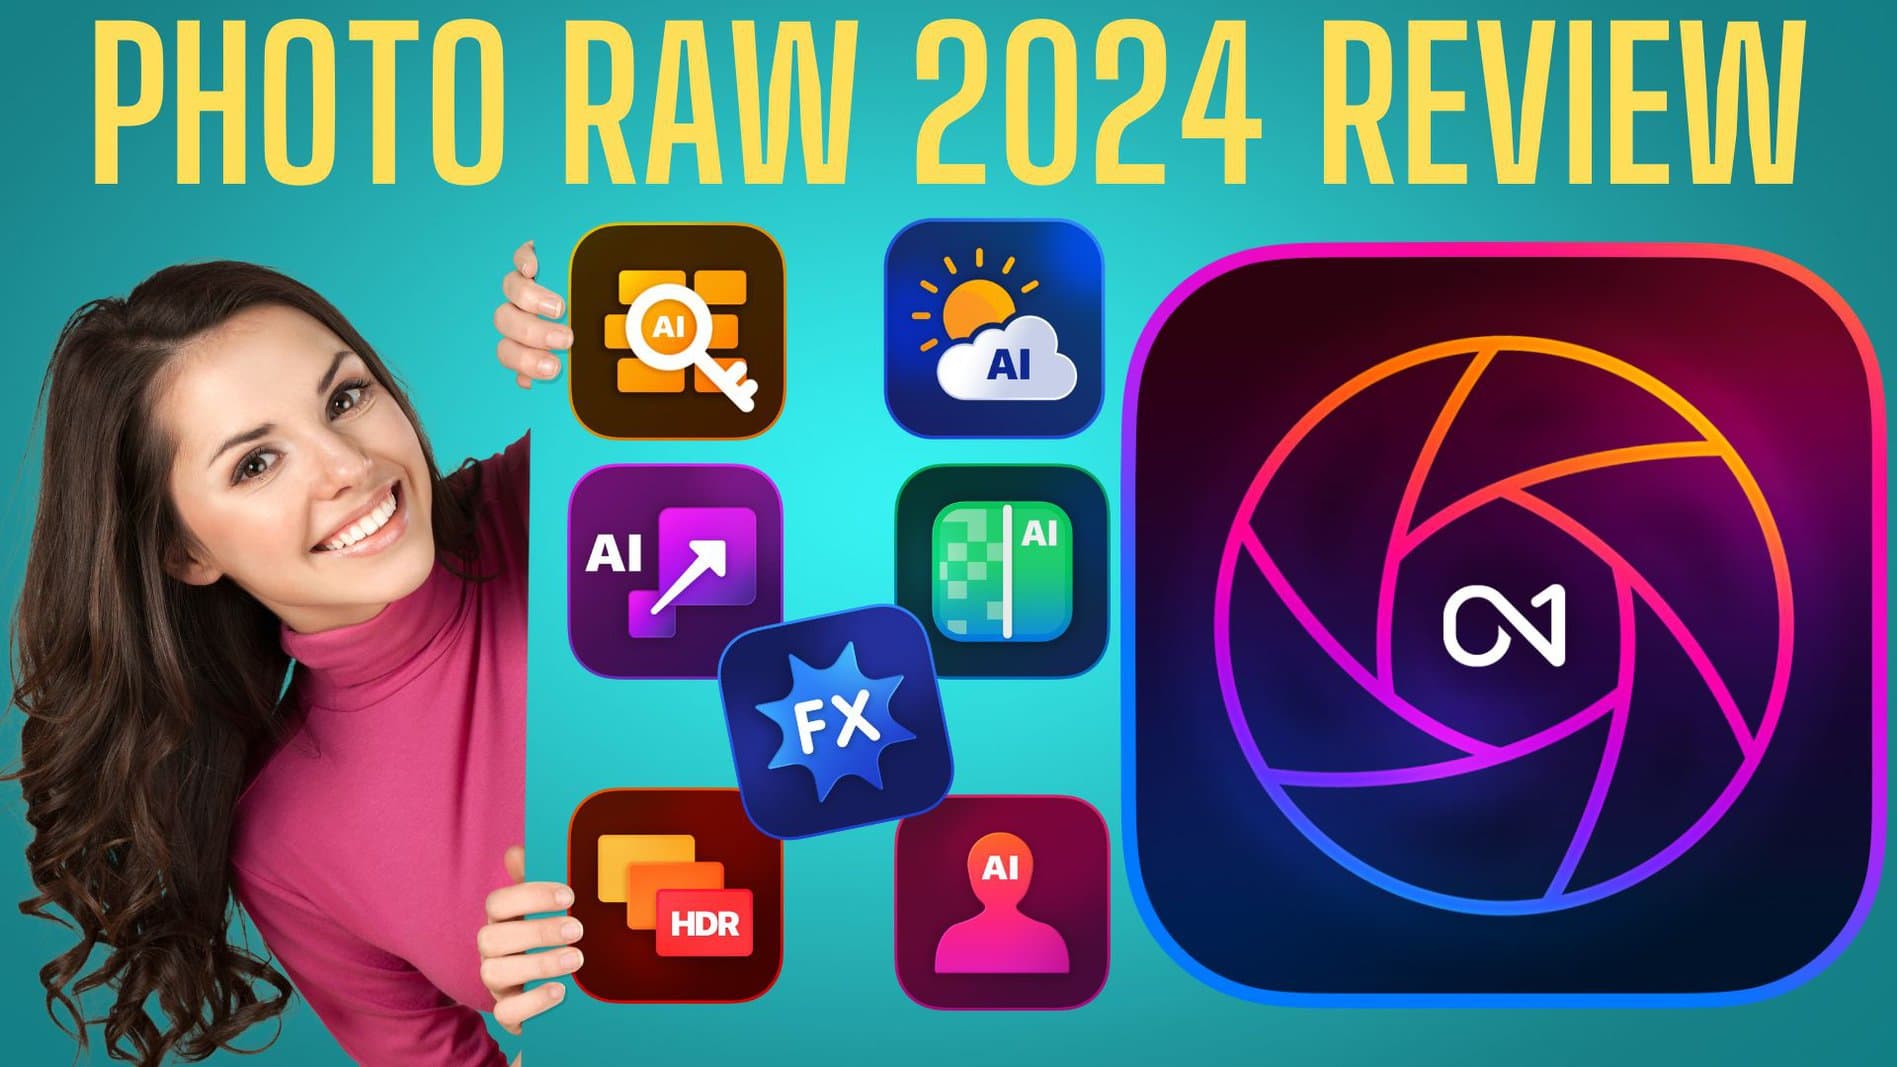 My ON1 Photo Raw 2024 Review: Just how good is it?